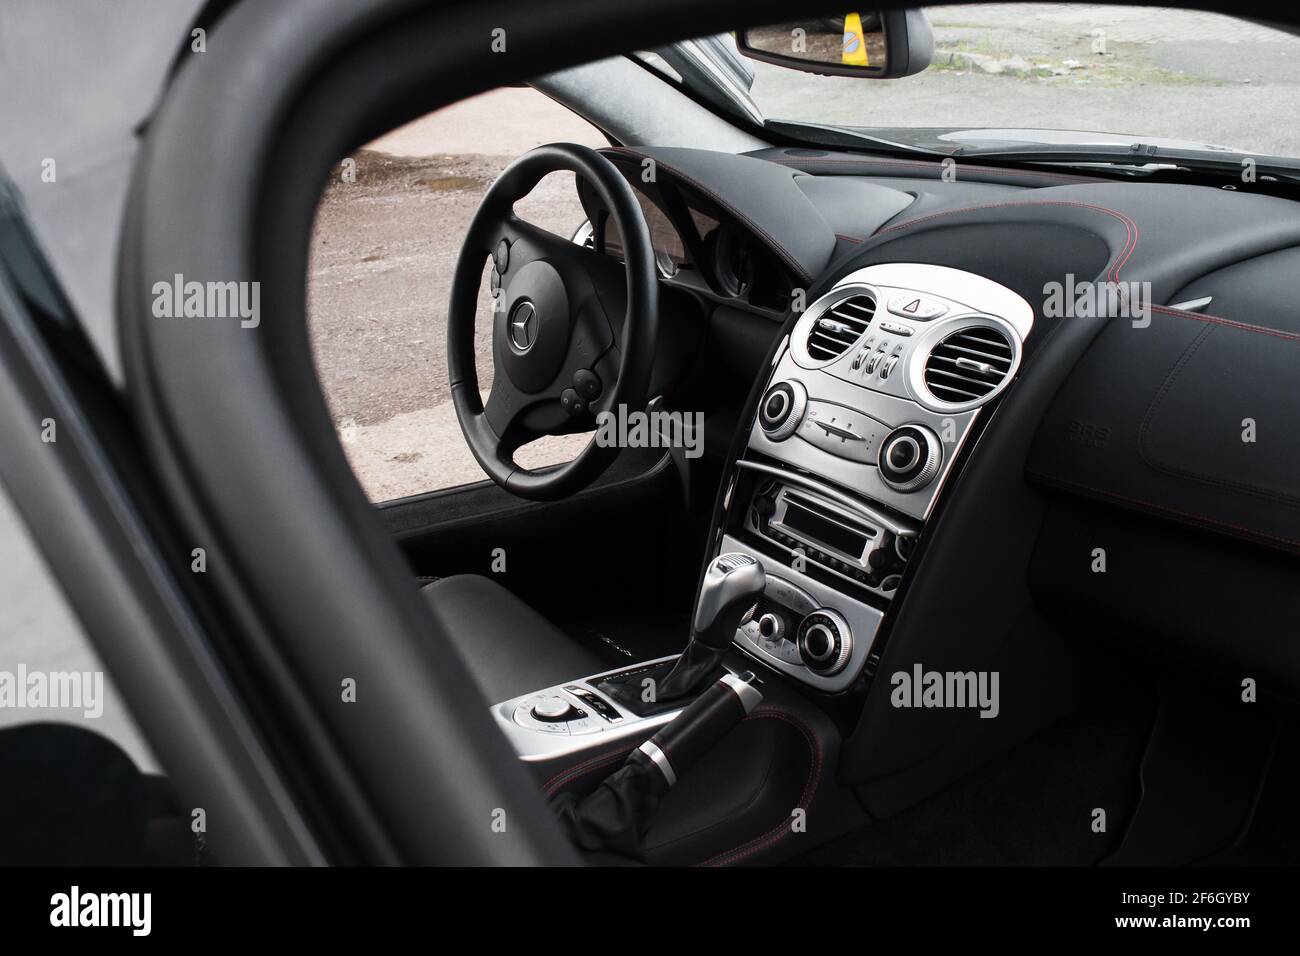 A Mercedes Slr Mclaren High Resolution Stock Photography and Images - Alamy